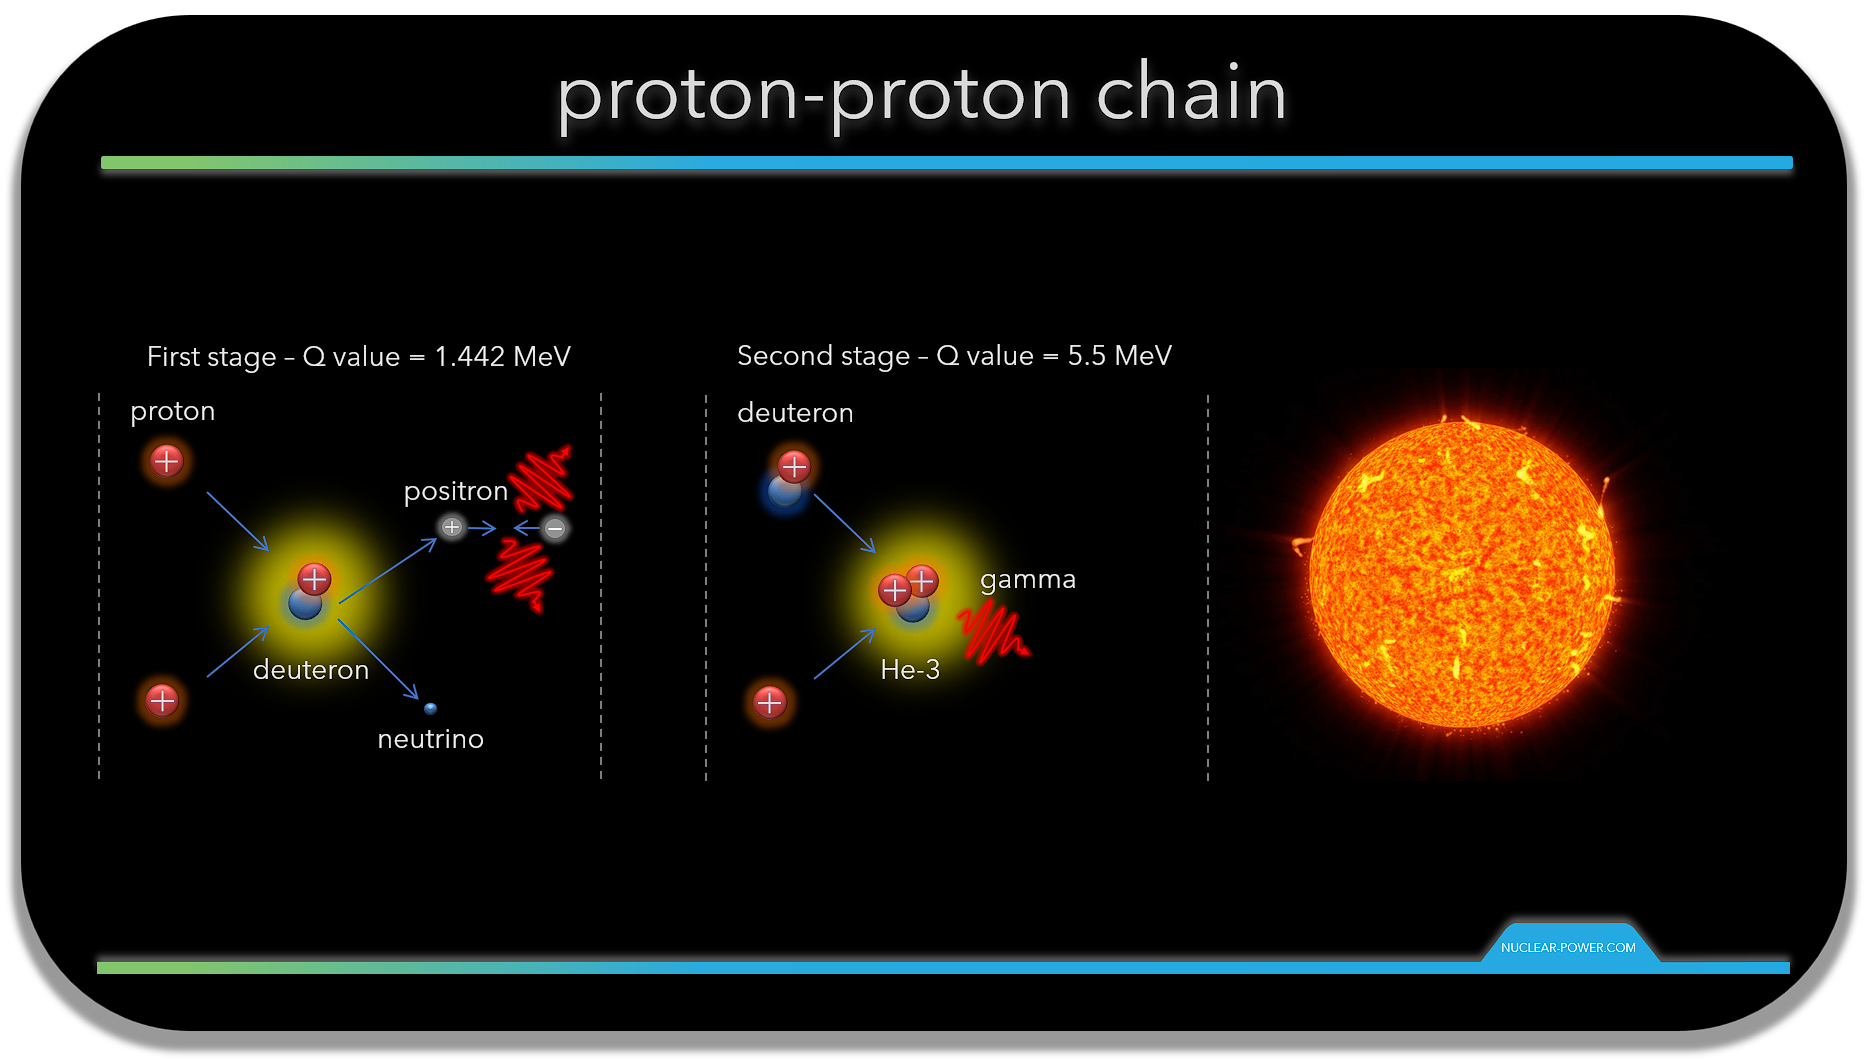 Most important nuclear reaction - proton-proton chain | nuclear-power.com